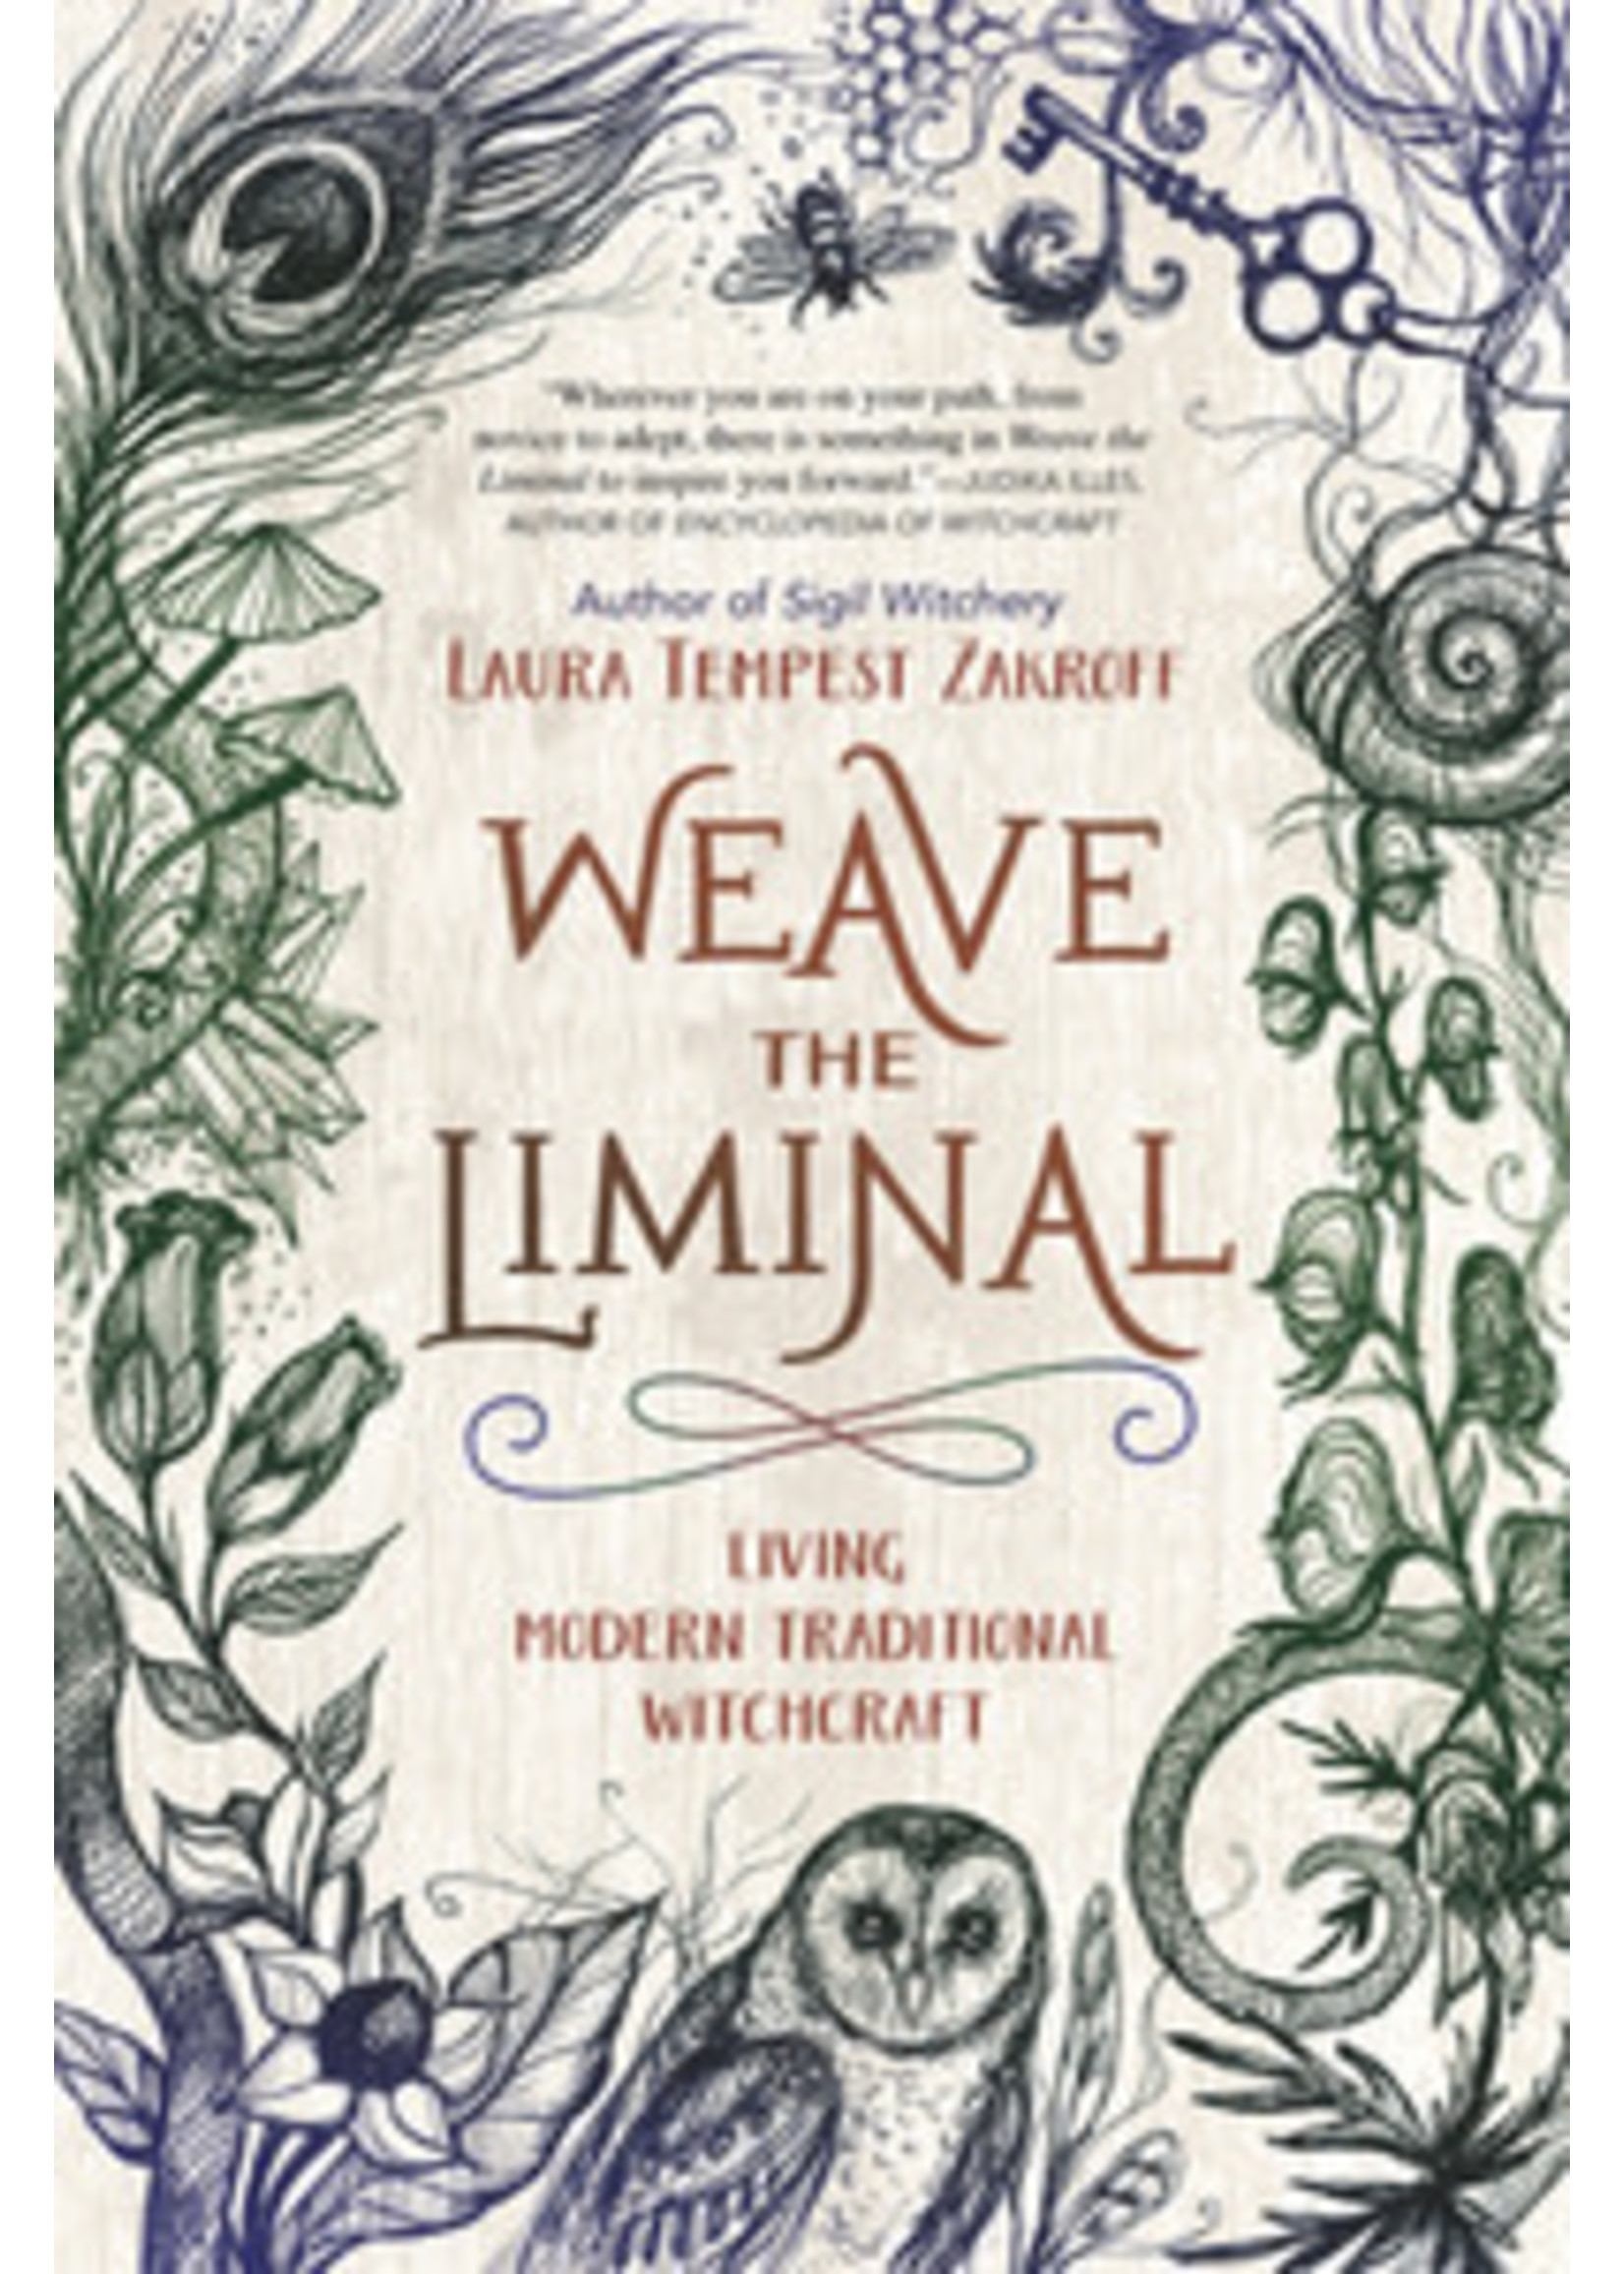 Weave the Liminal: Living Modern Traditional Witchcraft by Laura Tempest Zakroff